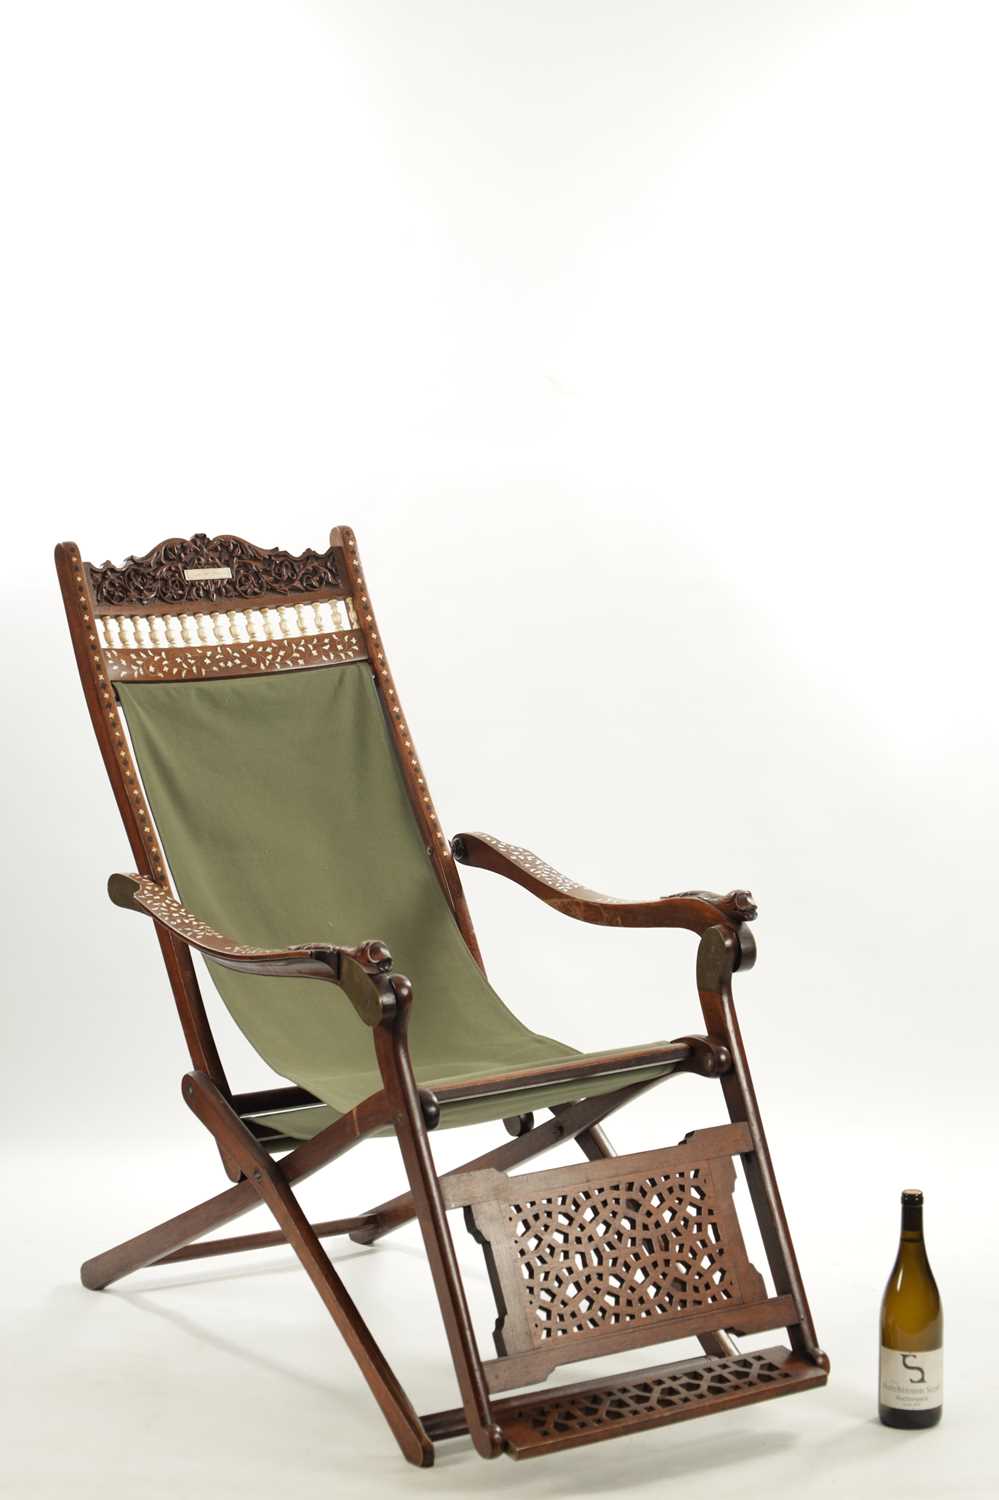 A LATE 19TH CENTURY ANGLO INDIAN IVORY INLAID HARDWOOD FOLDING CHAIR - Image 2 of 7